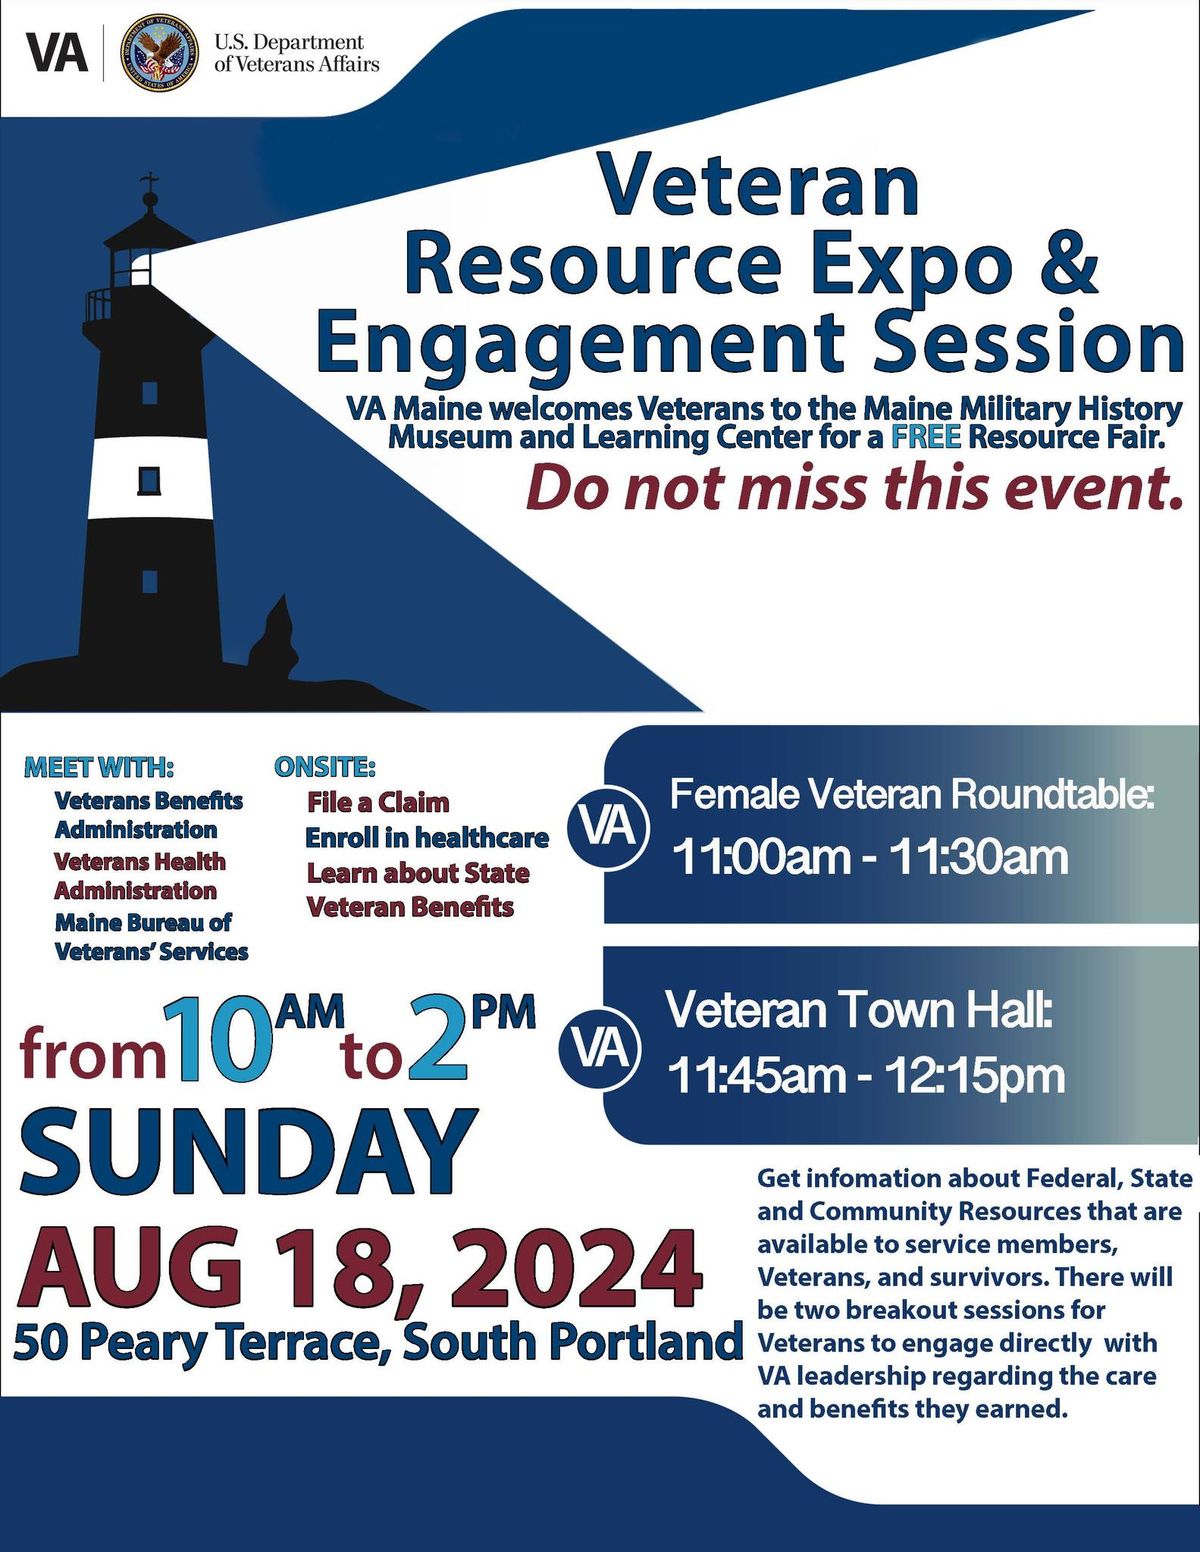 Veteran Resource Expo & Engagement Session